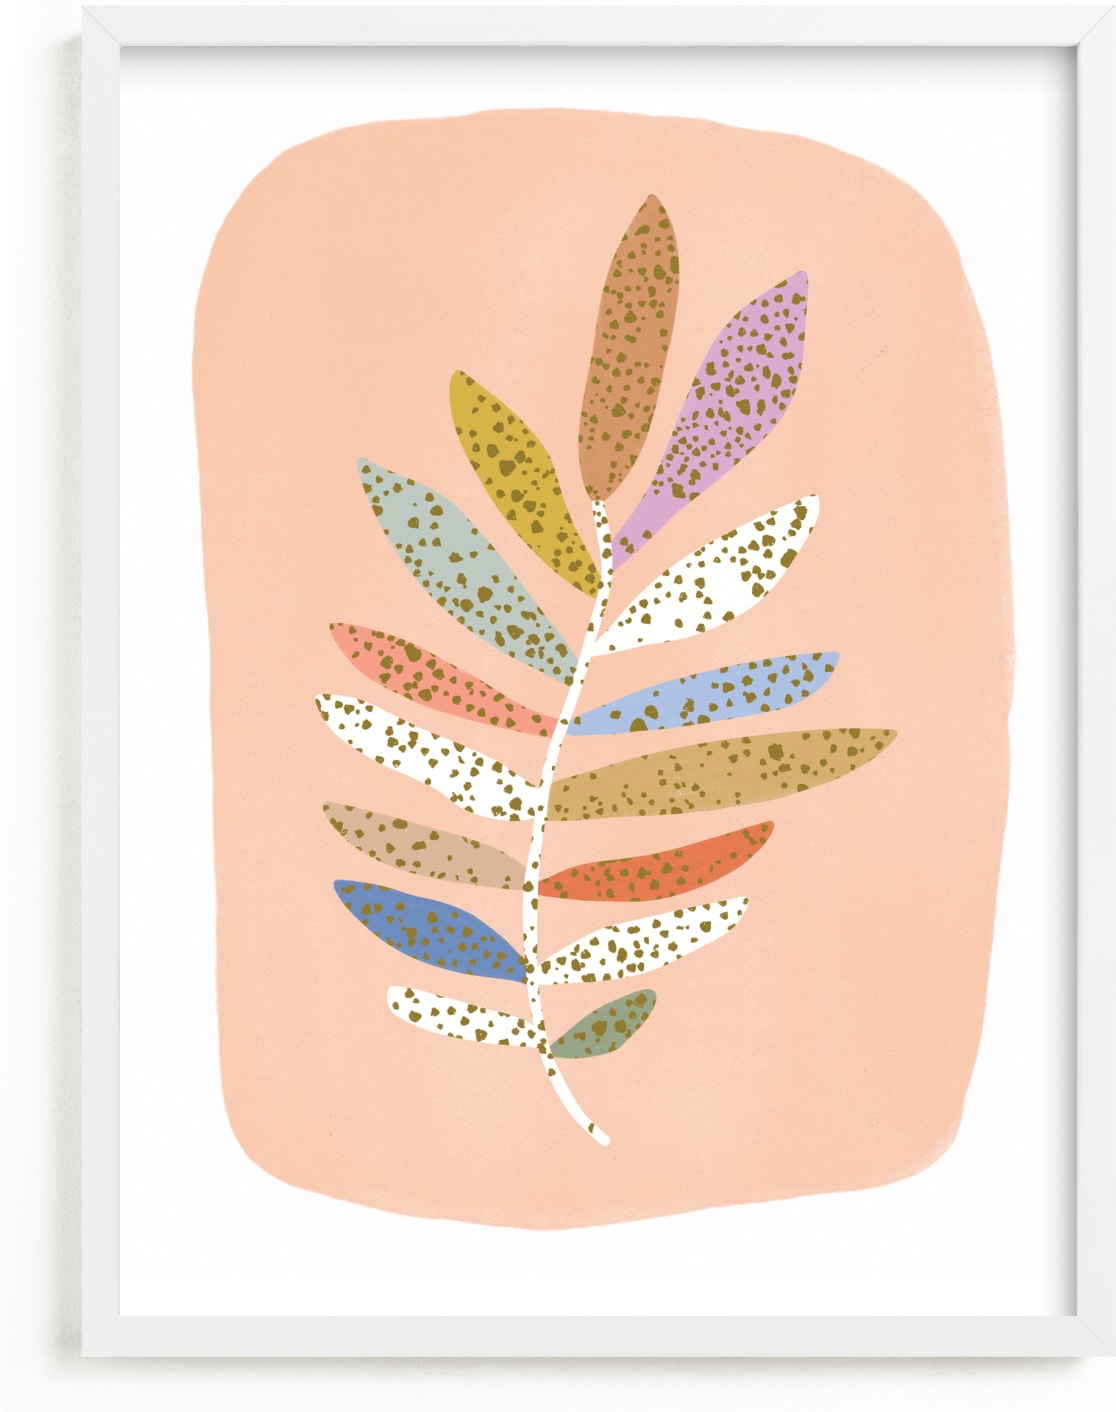 This is a colorful kids wall art by Kelly Ambrose called Speckled Branches.